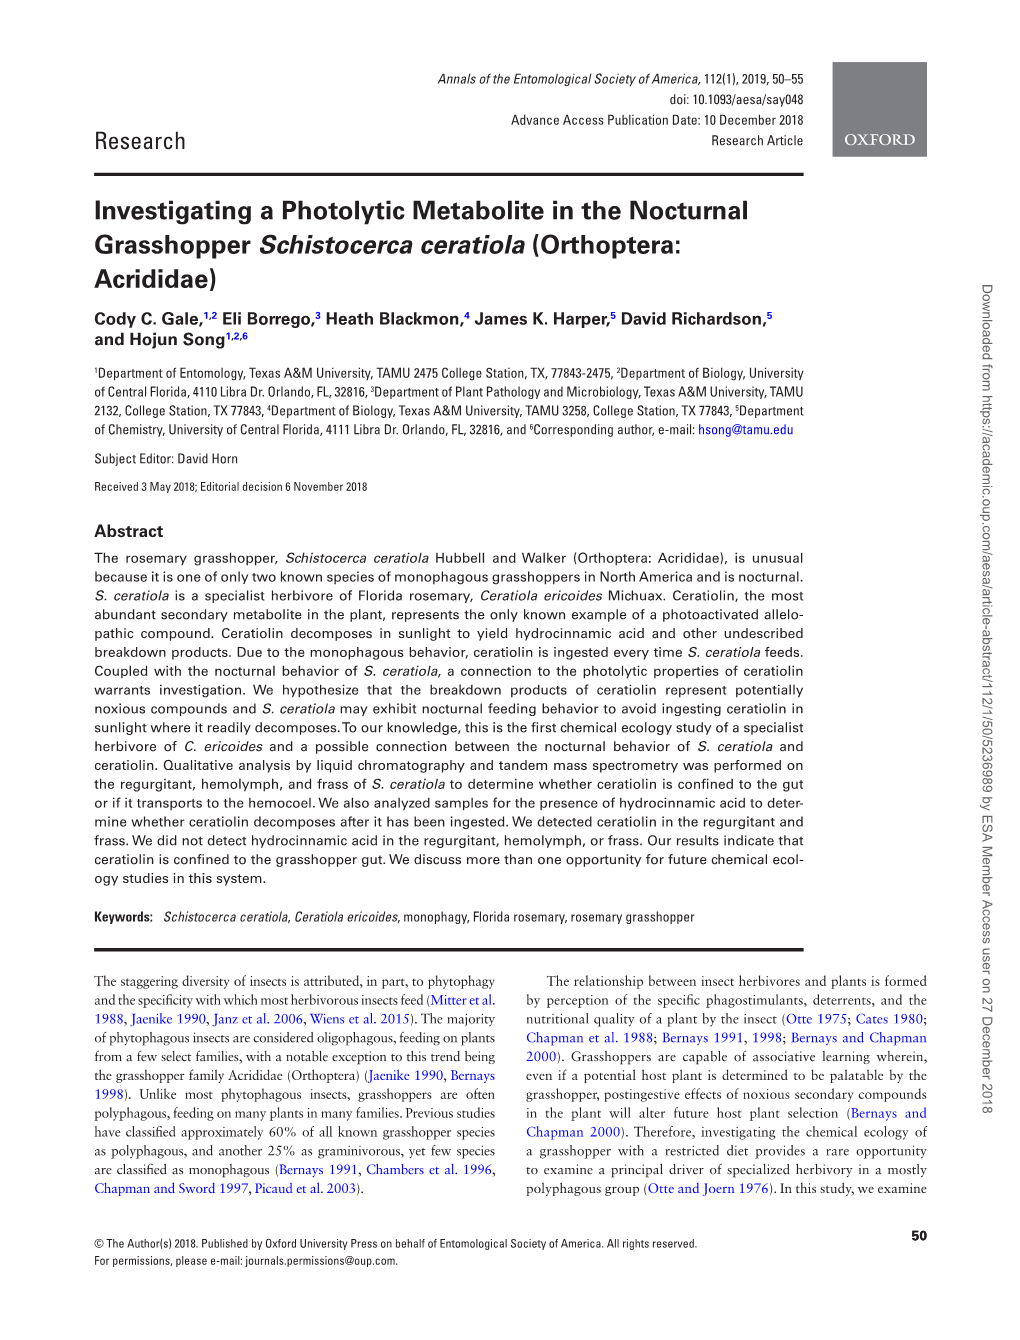 Investigating a Photolytic Metabolite in the Nocturnal Grasshopper Schistocerca Ceratiola (Orthoptera